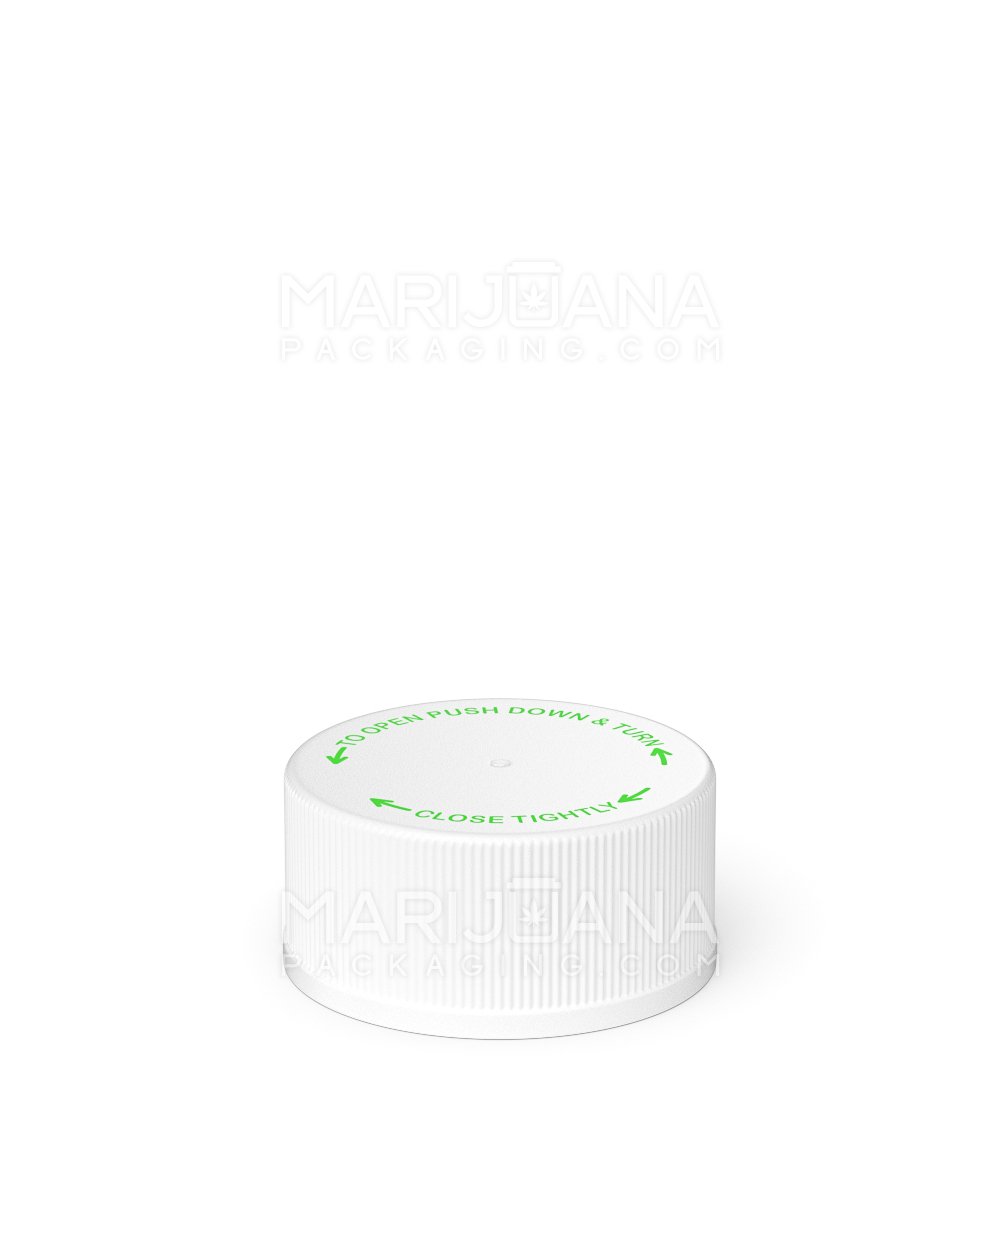 Child Resistant | Ribbed Push Down & Turn Plastic Caps w/ Text & Foam Liner | 28mm - Semi Gloss White - 504 Count - 3